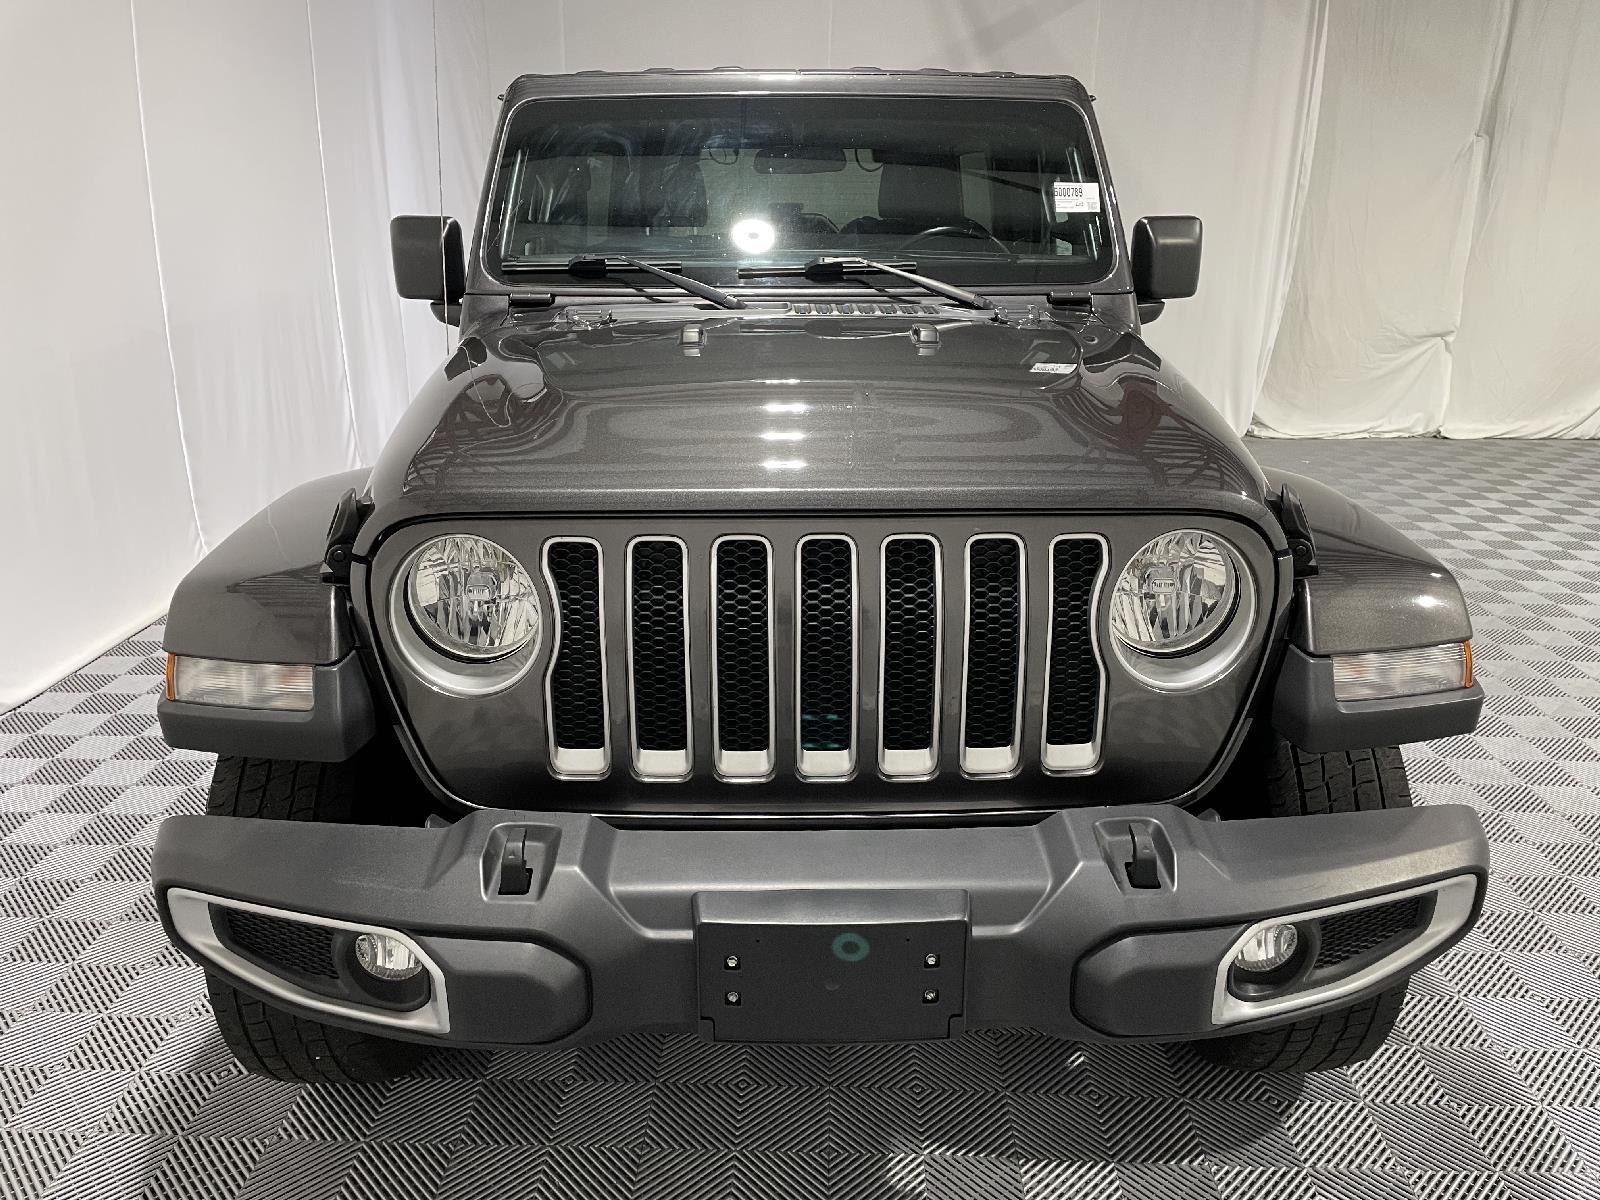 Used 2018 Jeep Wrangler Unlimited Sahara SUV for sale in St Joseph MO